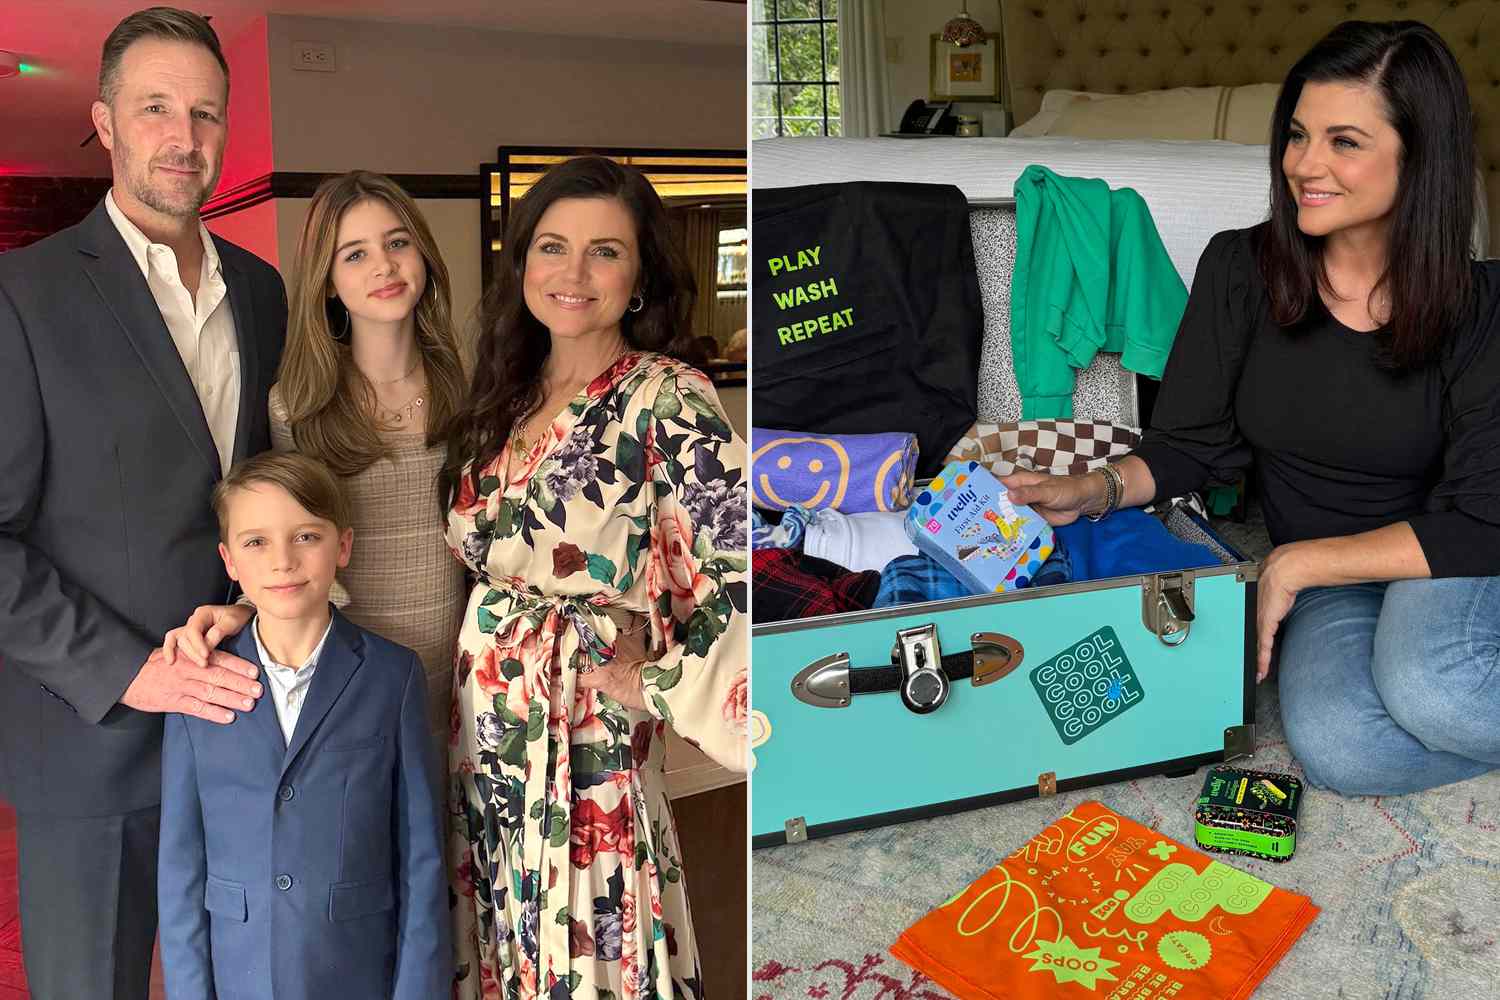 Tiffani Thiessen Opens Up About Her First Summer as a Sleepaway 'Camp Mom' of 2: 'Trying New Things' (Exclusive)